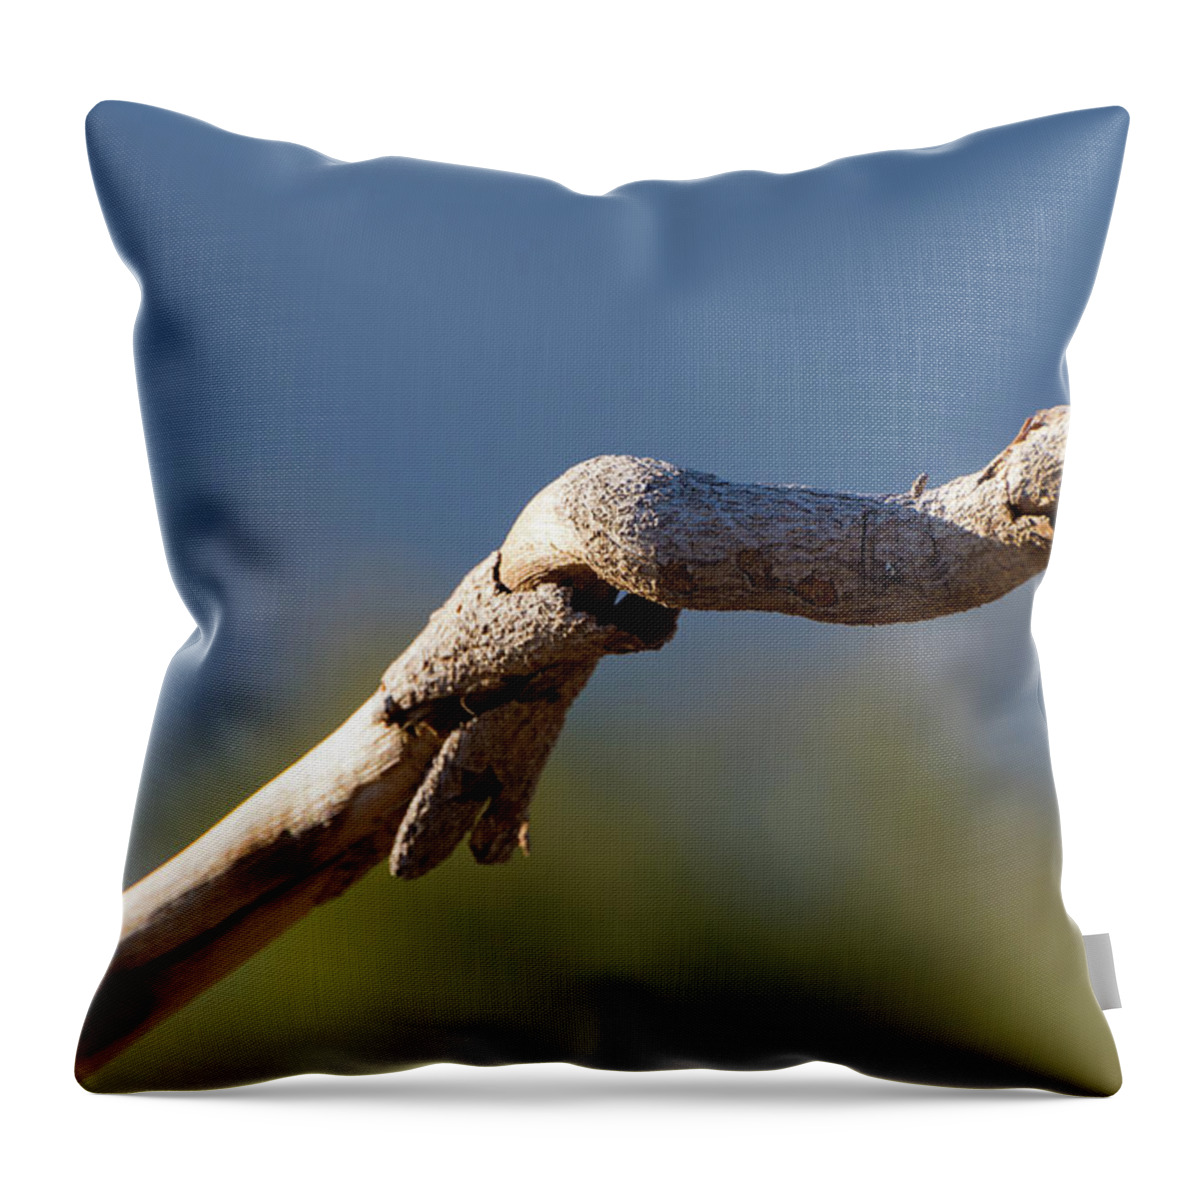 Gnarled Throw Pillow featuring the photograph Gnarled Branch by Douglas Killourie